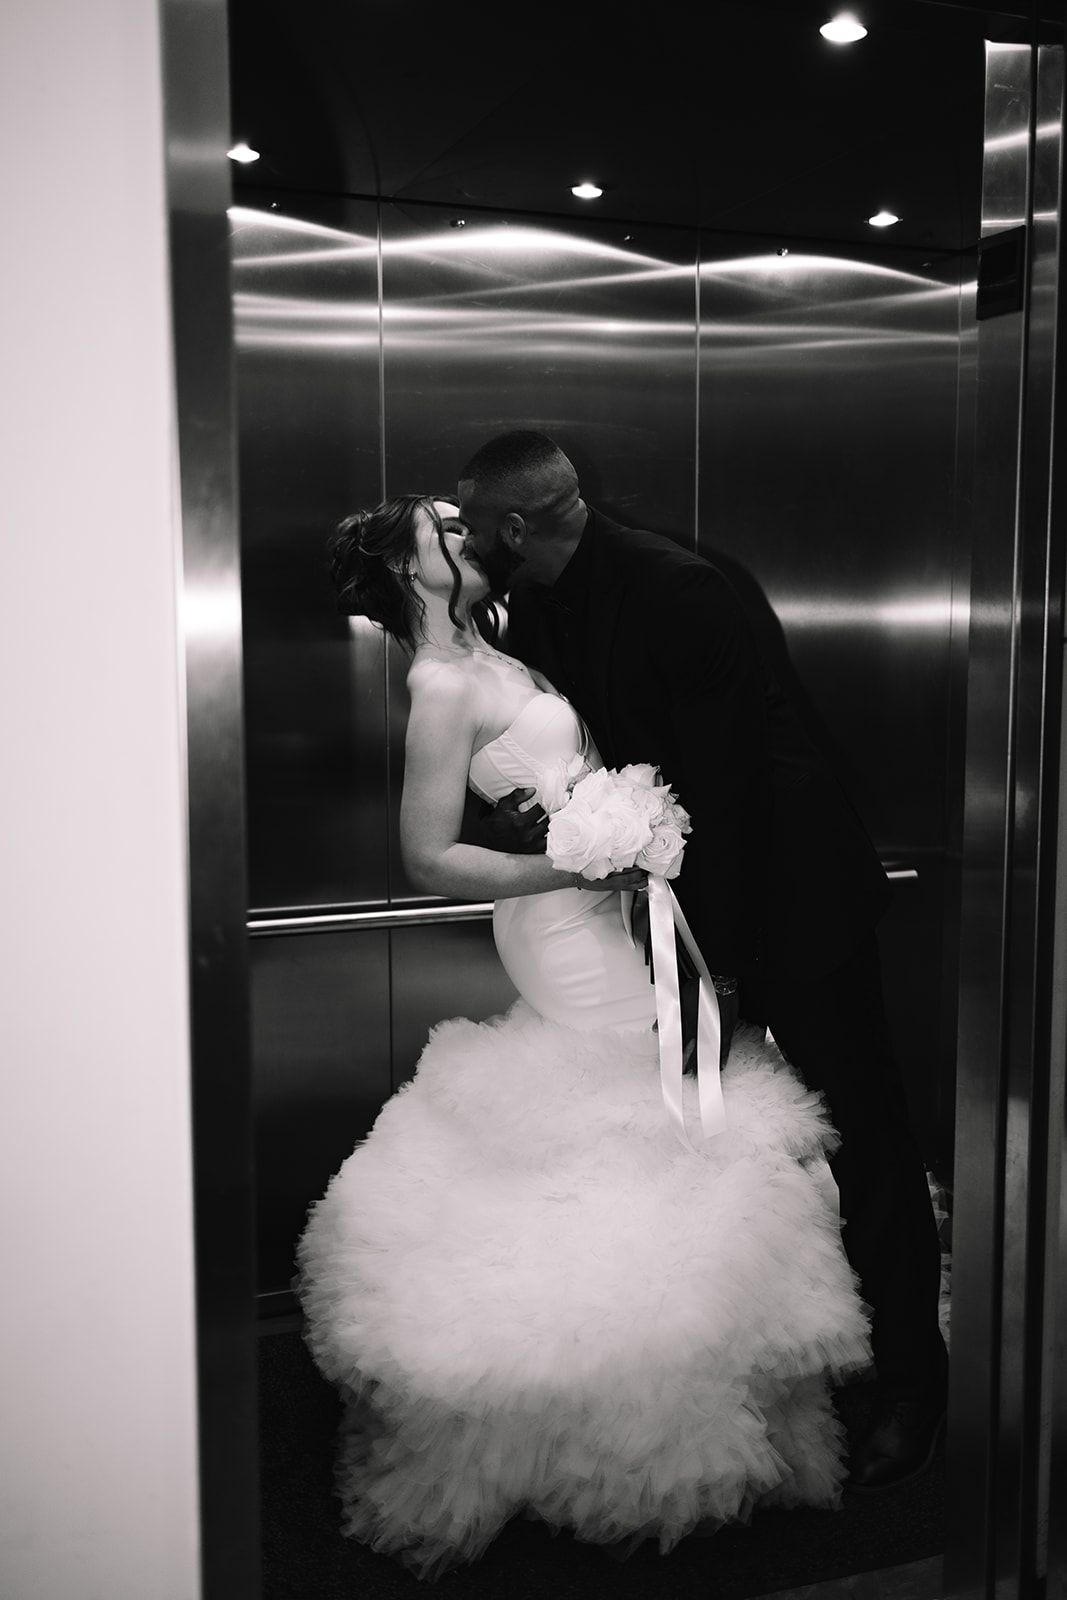 A bride and groom share a kiss in an elevator. The bride is wearing a white wedding dress and holding a bouquet of flowers, while the groom is in a black suit at the machine shop in minneapolis